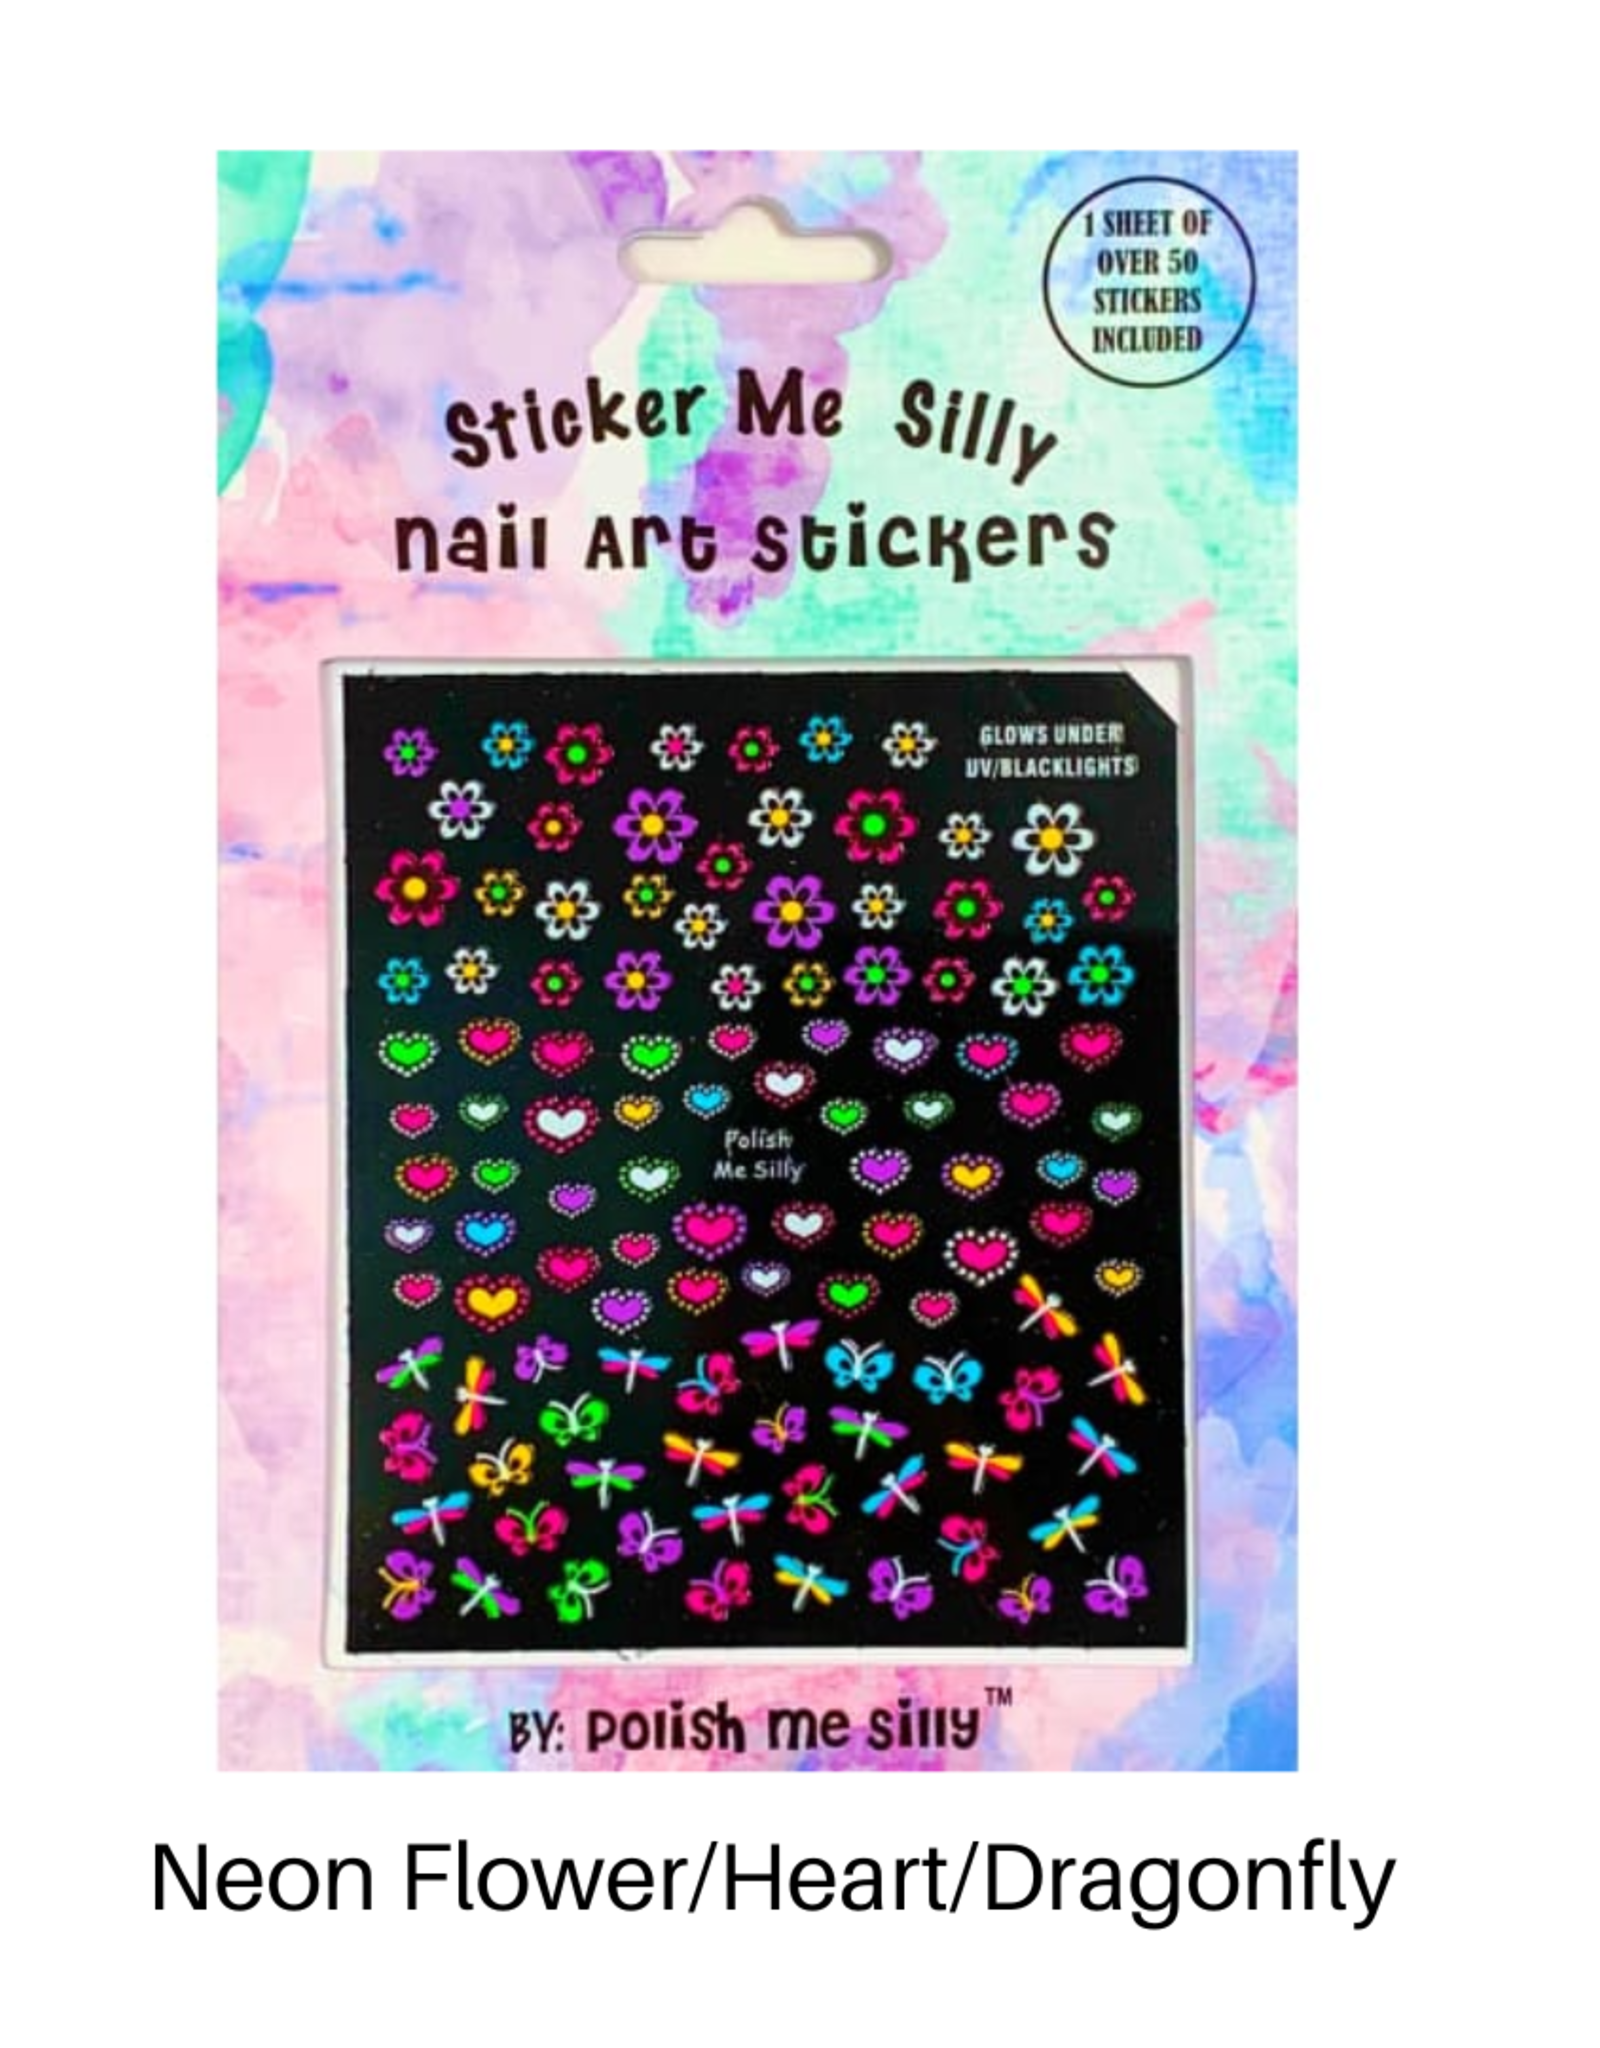 Sticker Me Silly,  Nail Art Stickers